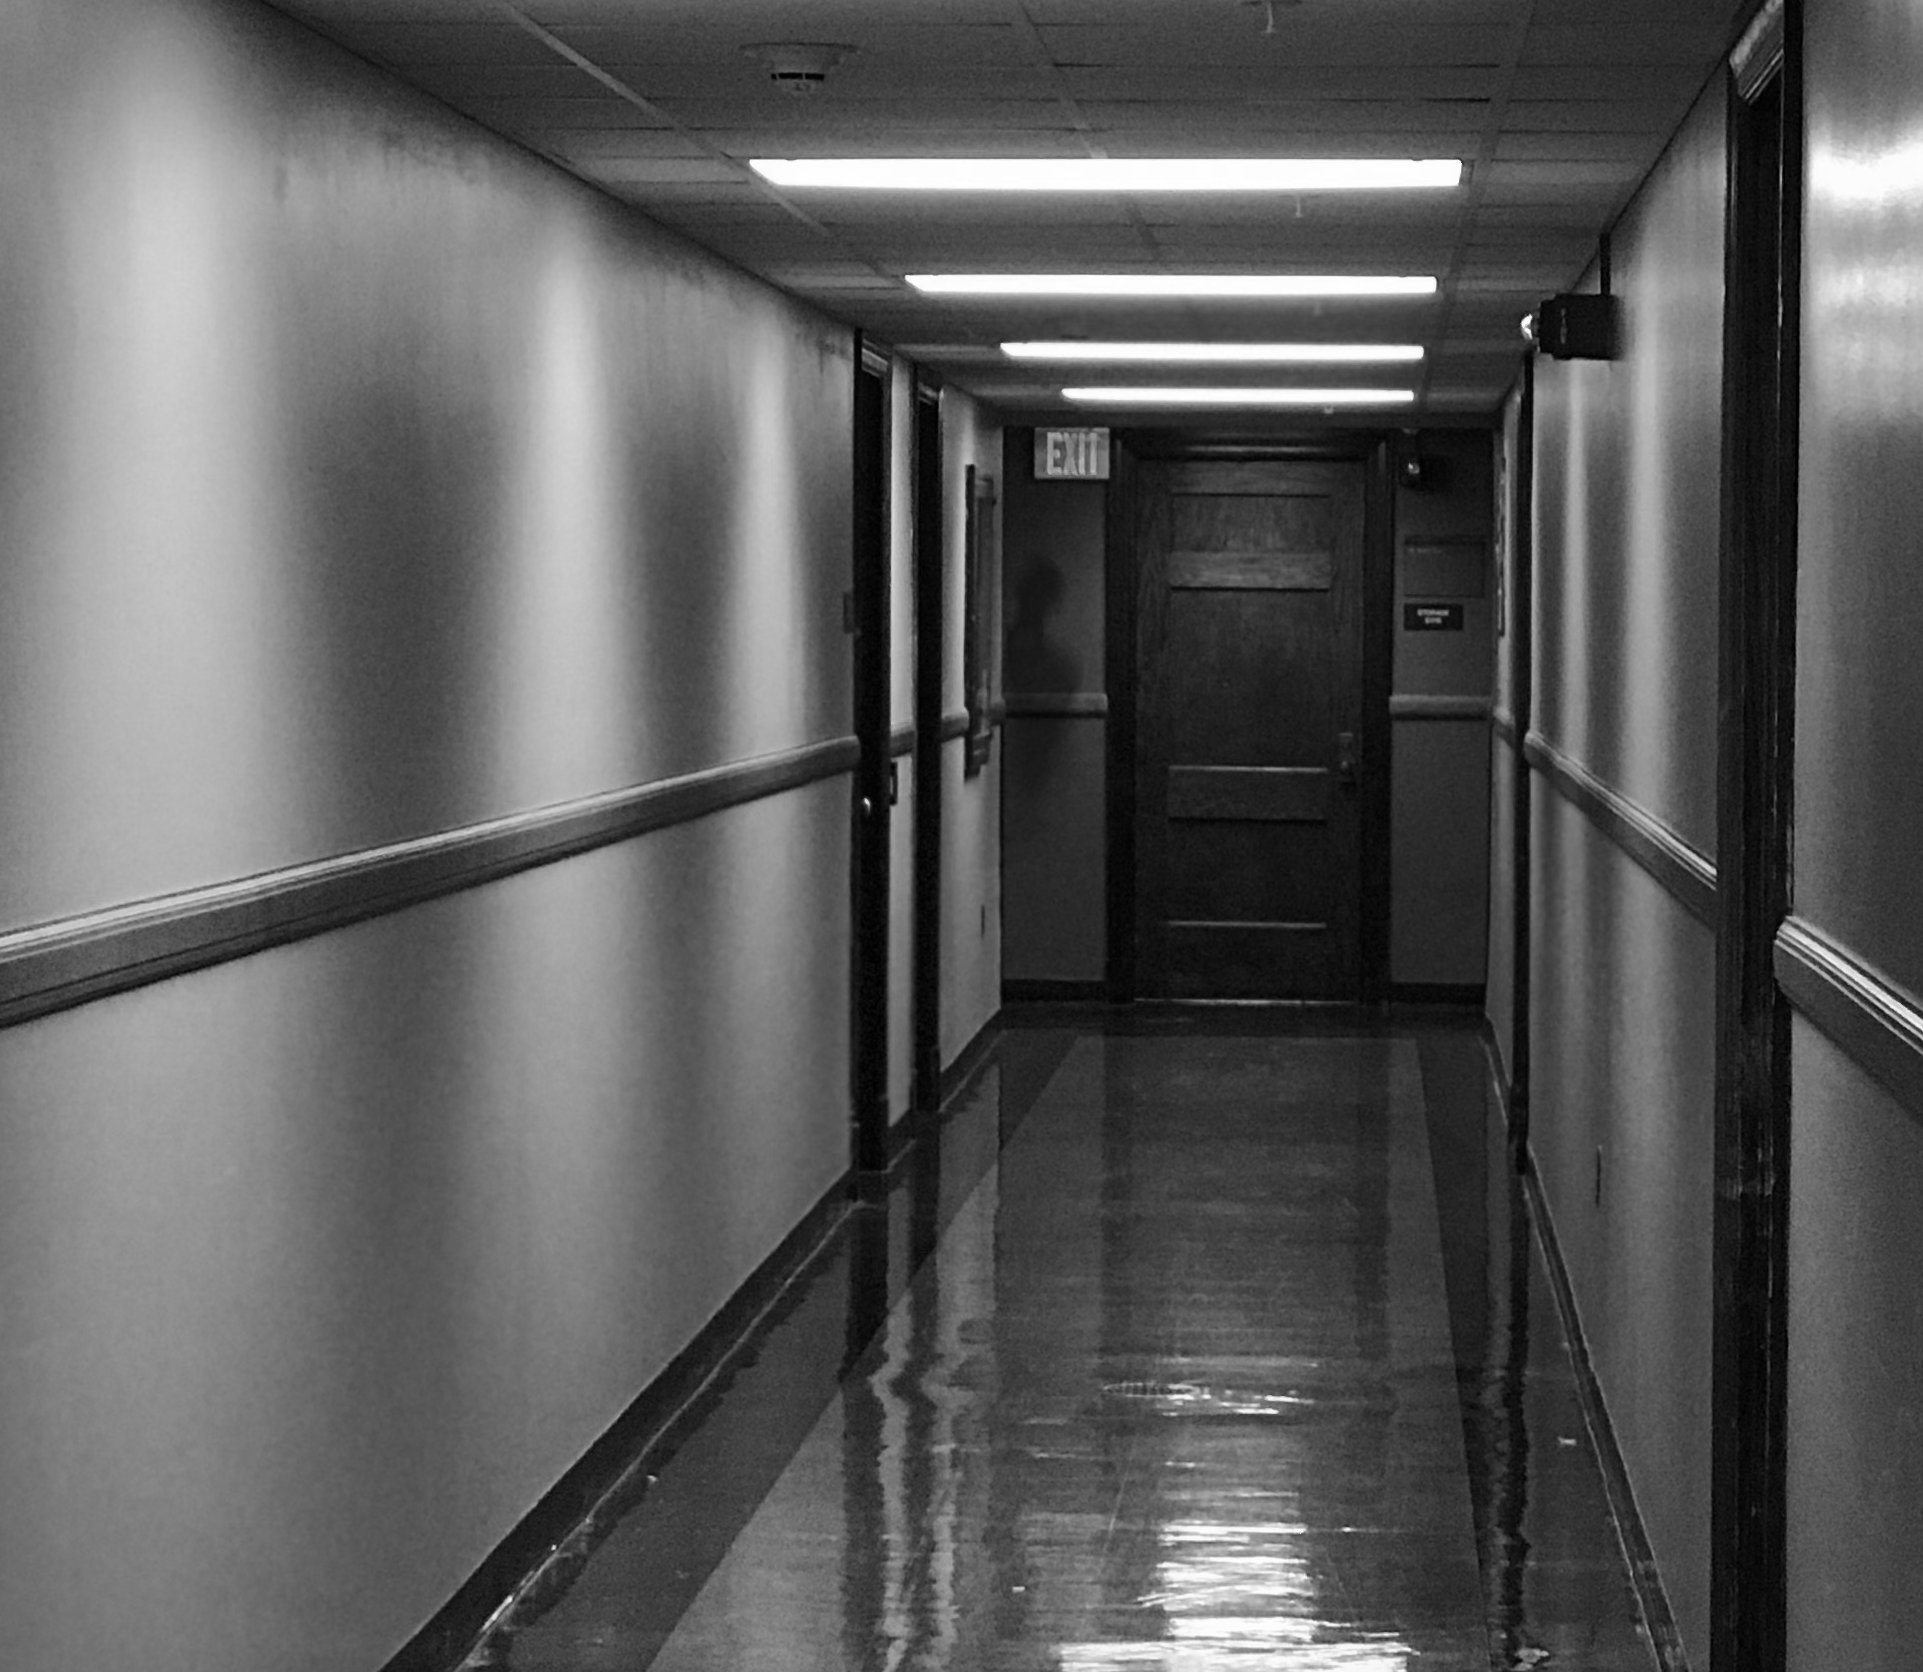 Image shows a hallway in a dorm room. At the end of the hallway is possibly a shadow person. Or photoshop.